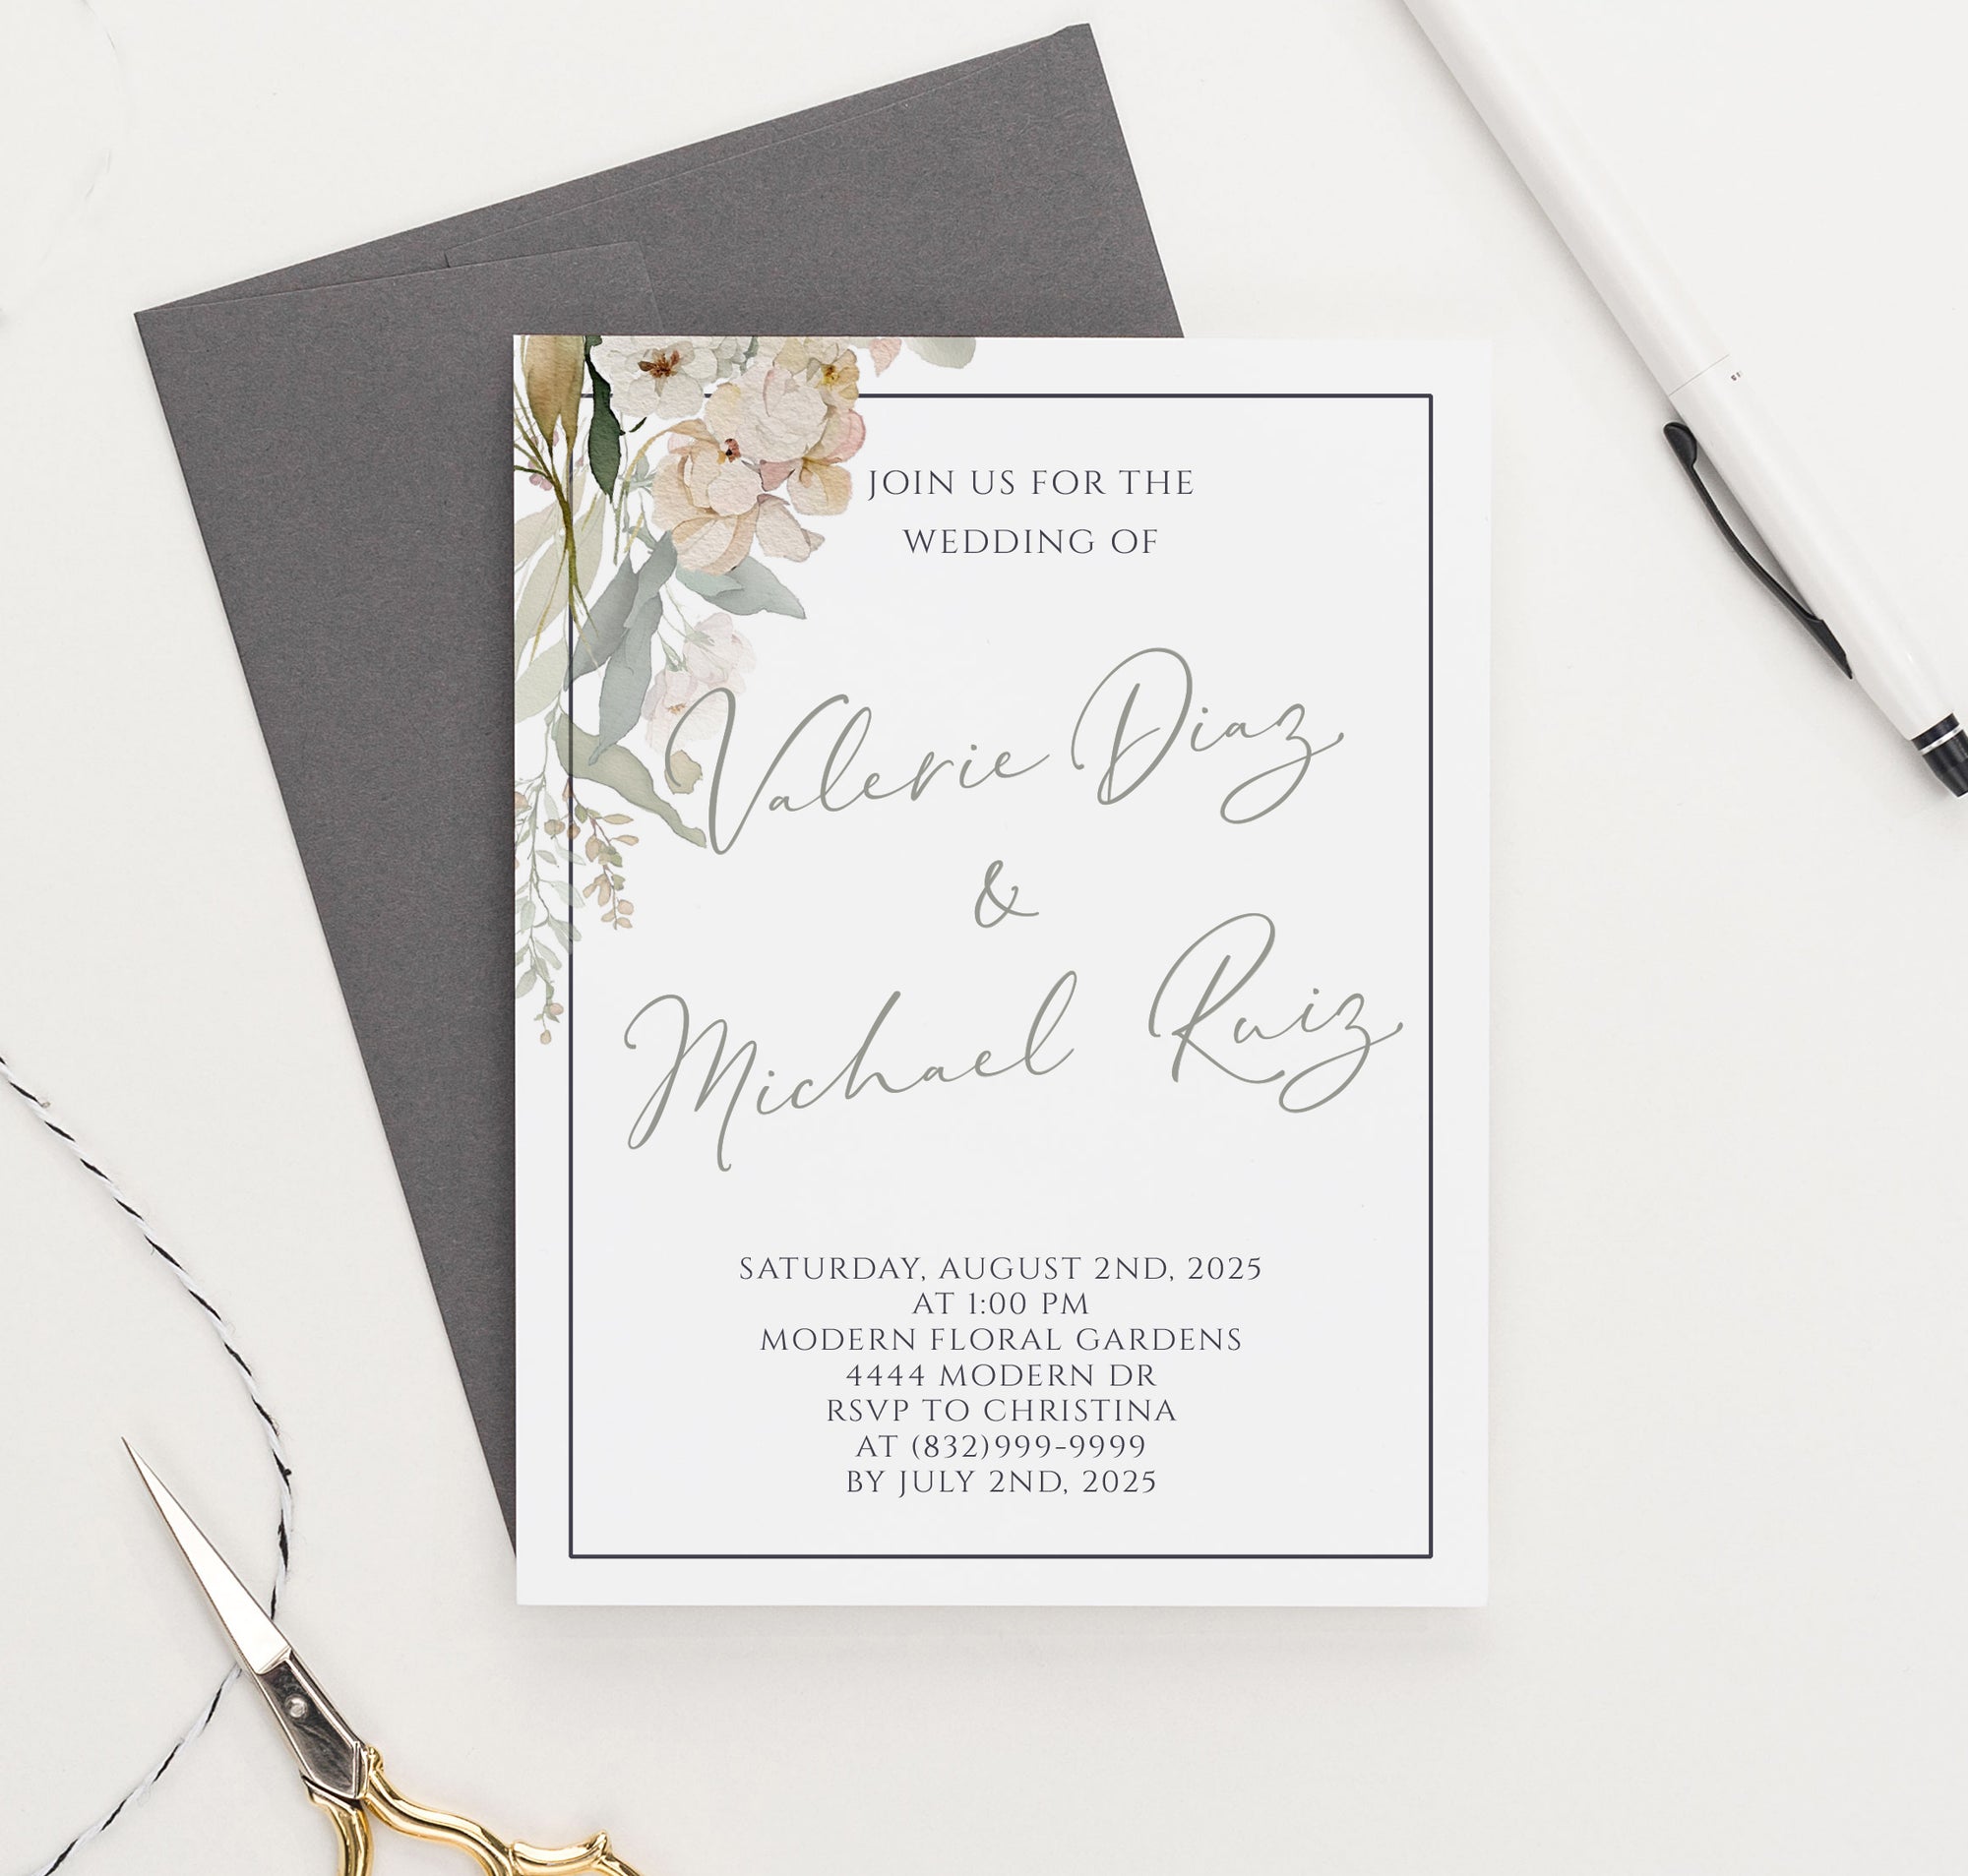 WI064 Elegant Wildflower Greenery wedding invitations with Border floral classy couples marriage wild flower